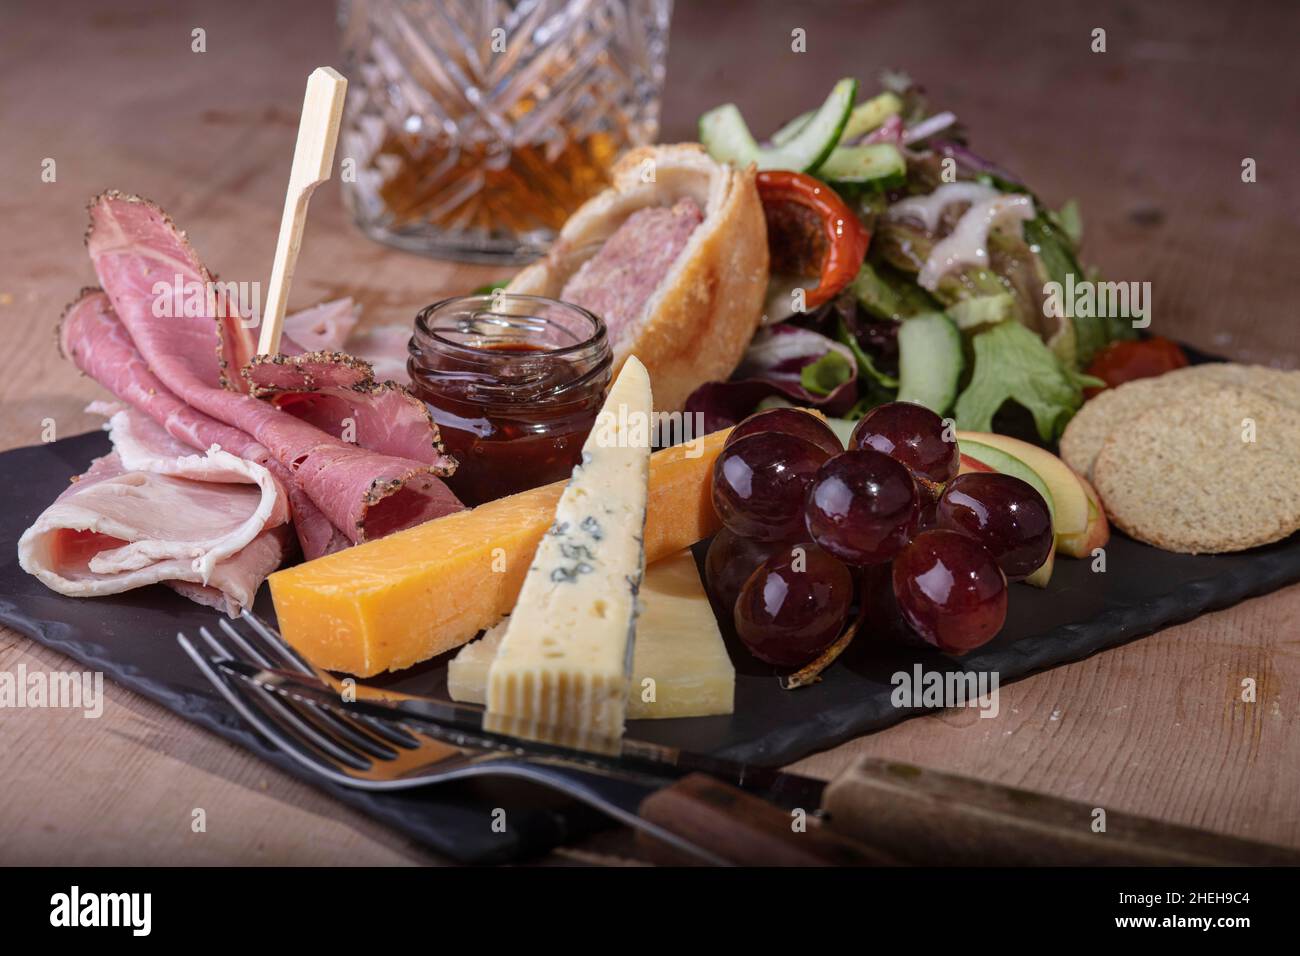 Ploughmans Lunch of meats and fruit. Stock Photo